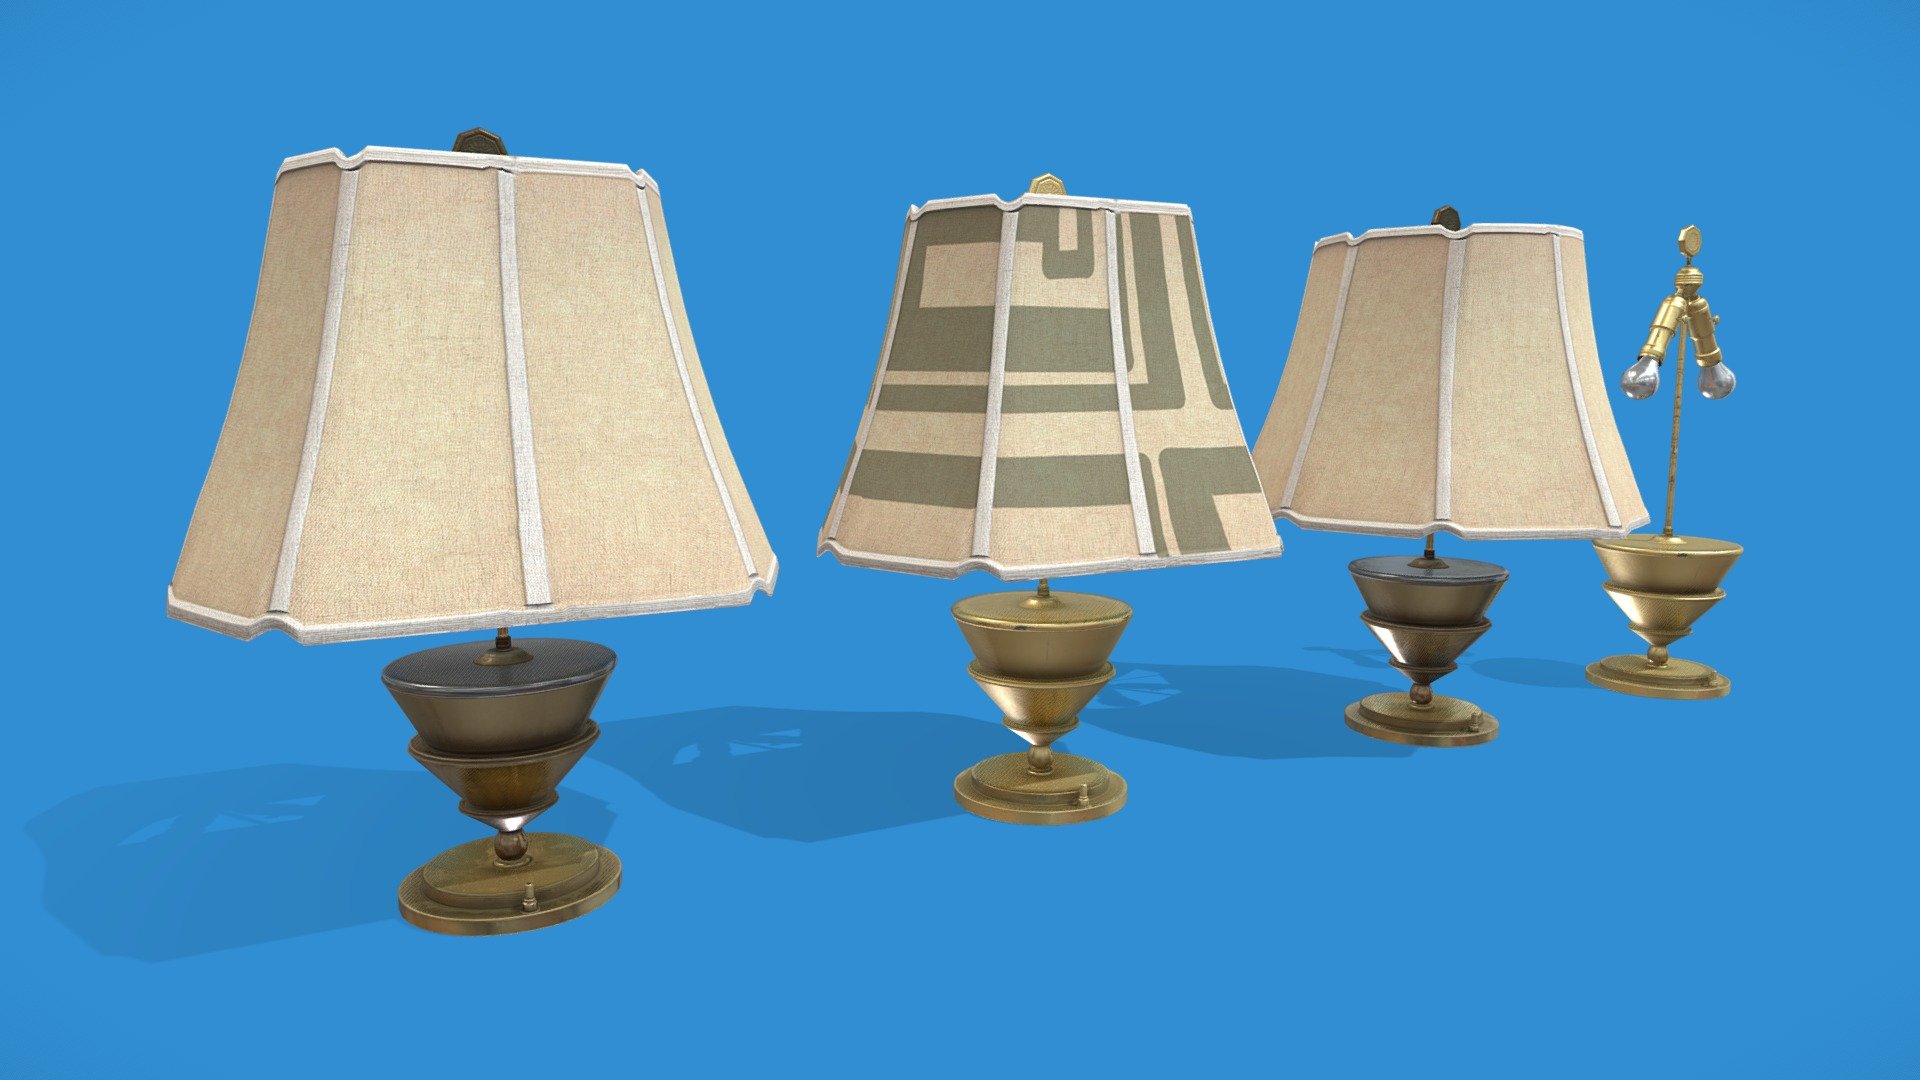 Stylish 1920s gold painted or bronze Table Lamps in two texture variations and one unshaded model variation 3d model